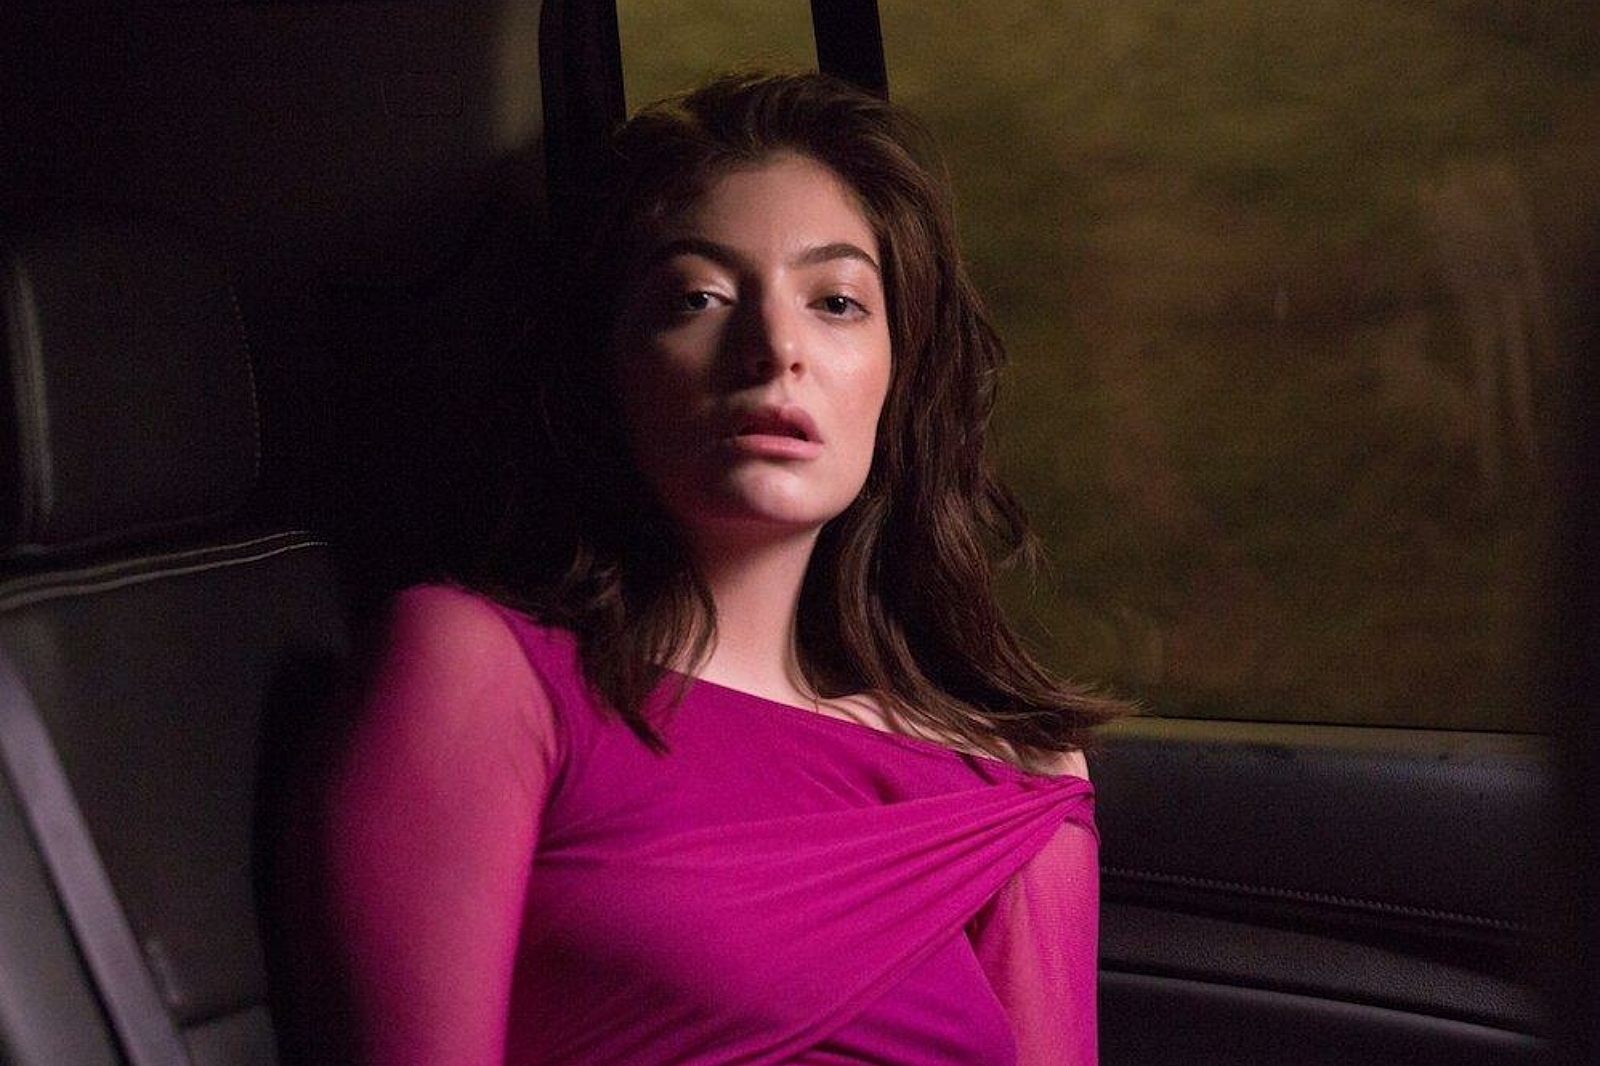 Watch Lorde debut ‘Homemade Dynamite’ at Coachella